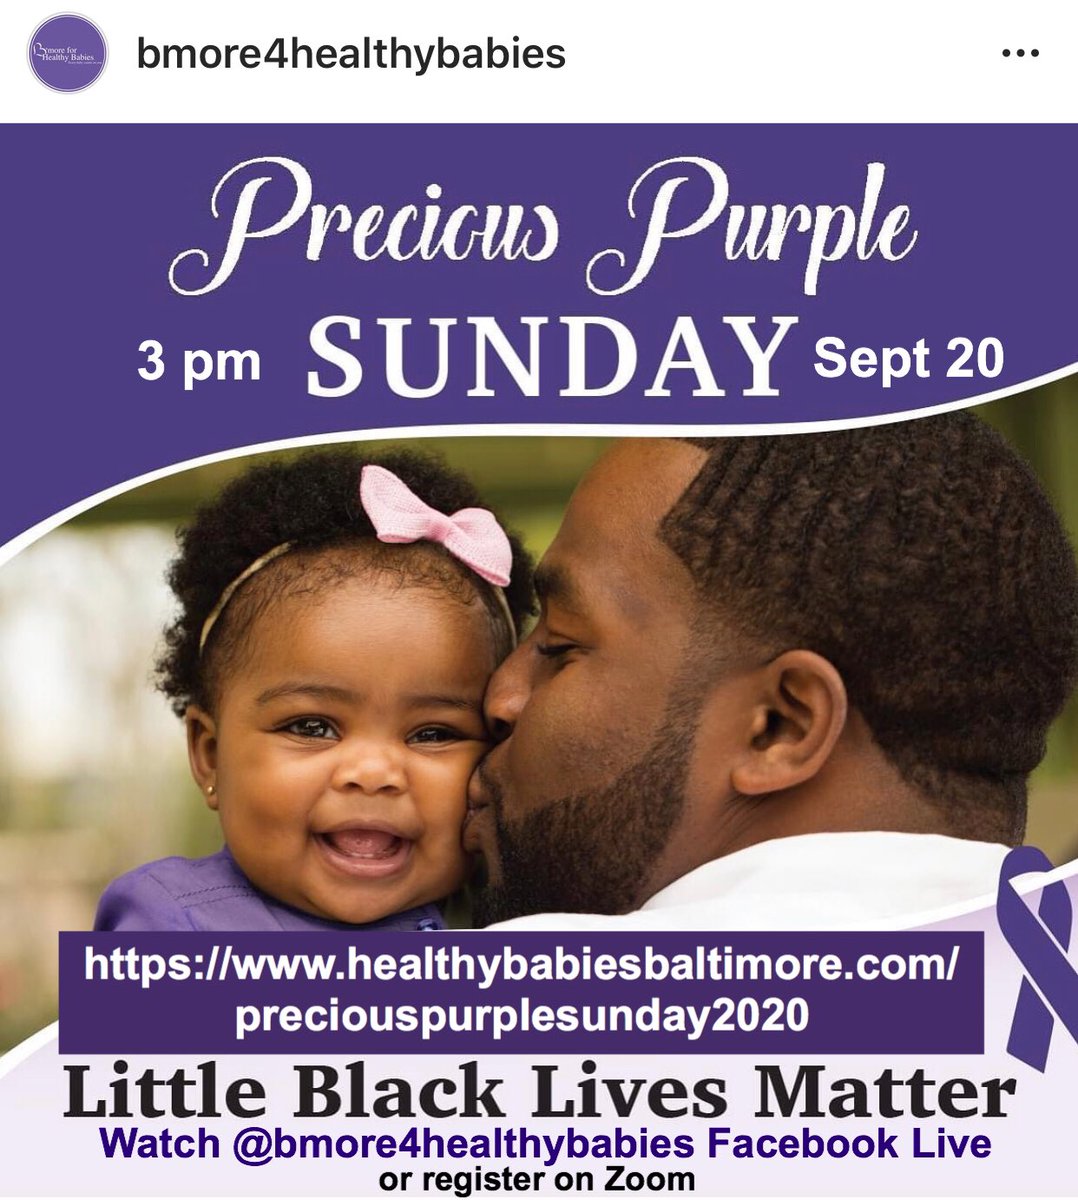 What more perfect day to celebrate #preciouspurplesunday💜 & that #littleblacklivesmatter? At 3pm today is Zoom of Facebook Live—Baltimore’s babies are counting on you—and please do share this @bmore4healthybabies event to support #maternalhealth #healthequity #infantsafety